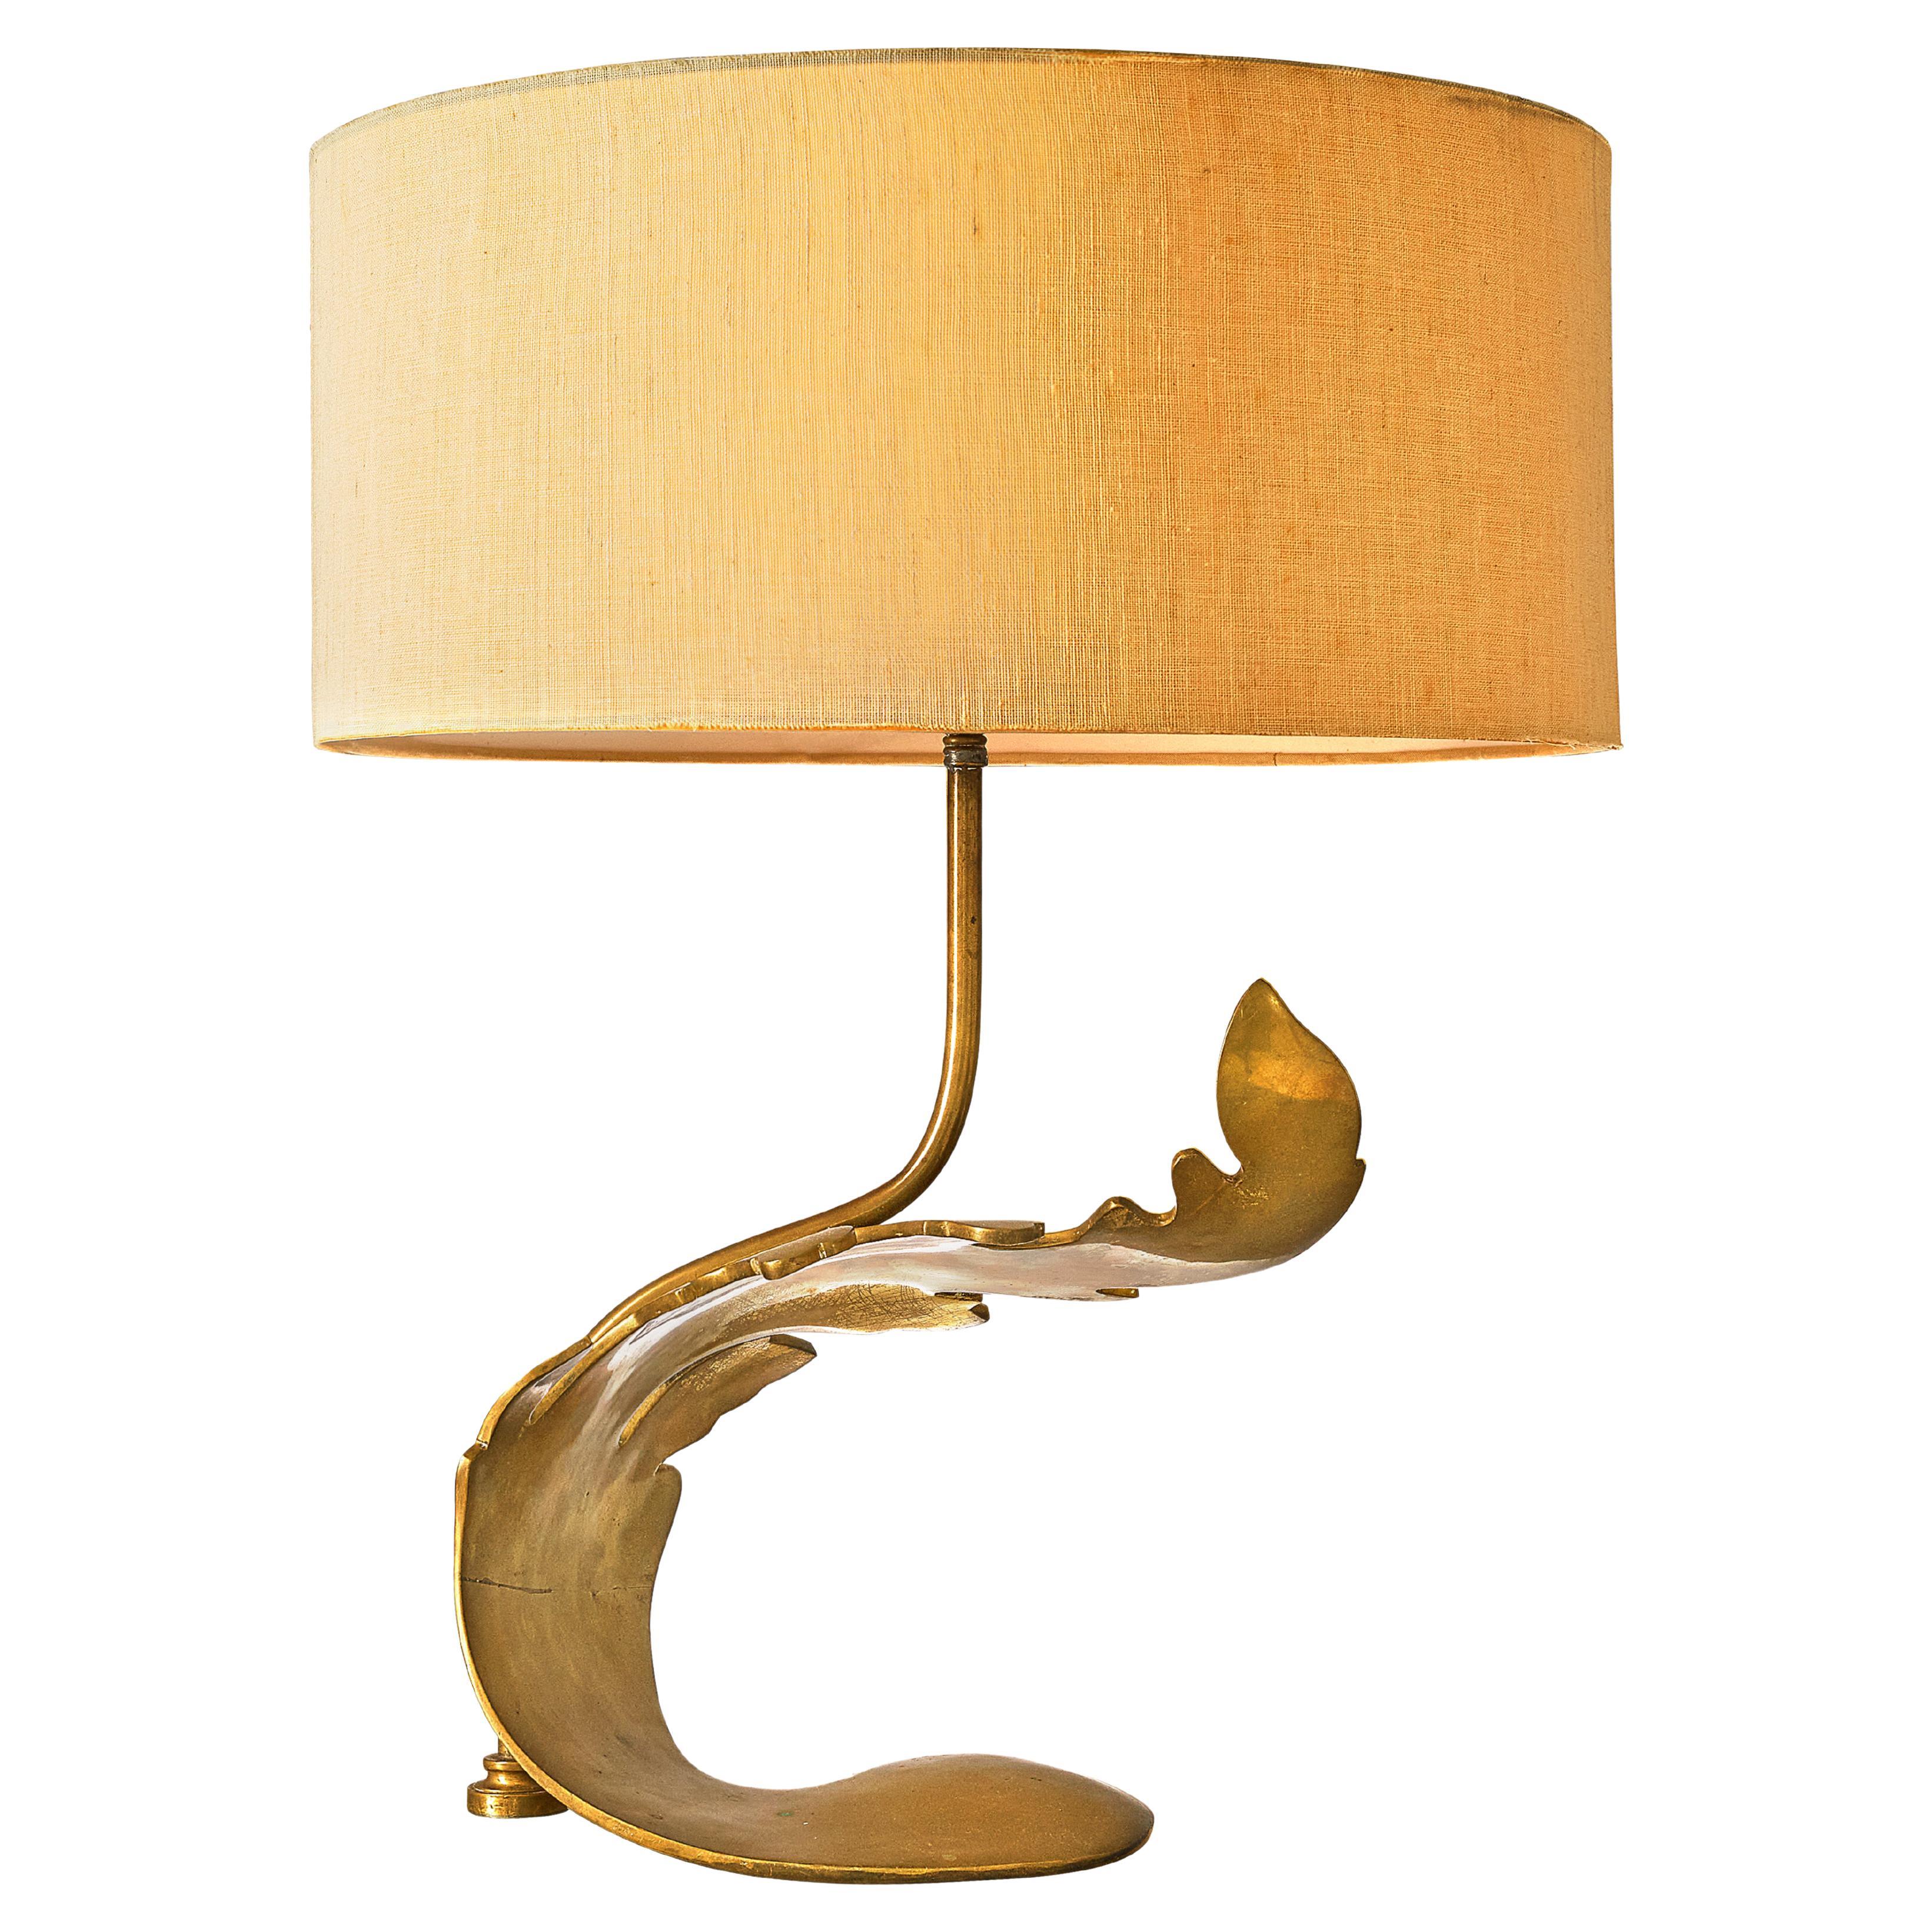 Unique French Table Lamp with Leaf Detail